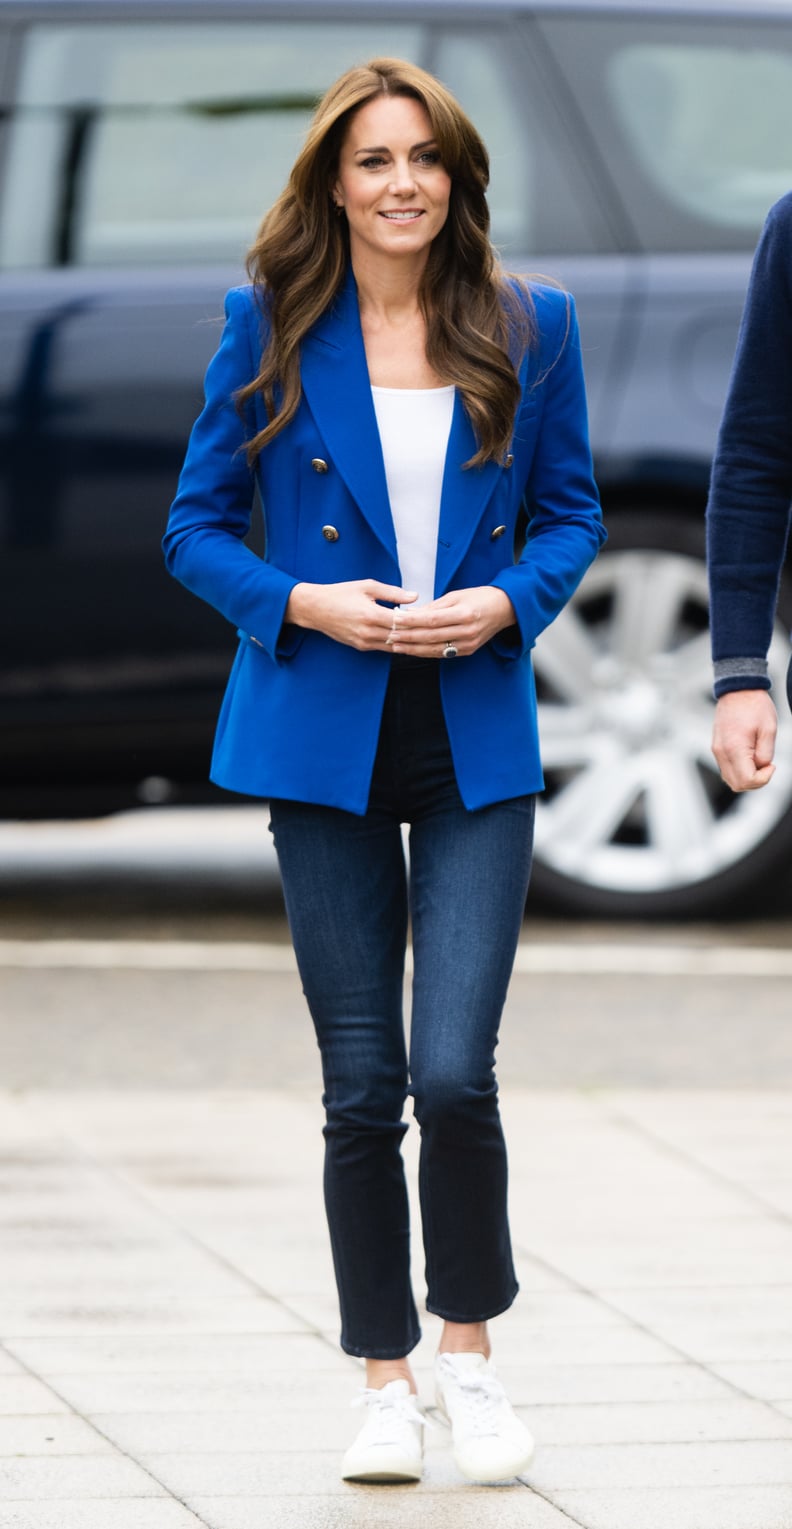 Kate Middleton at Bisham Abbey National Sports Centre on Oct. 12